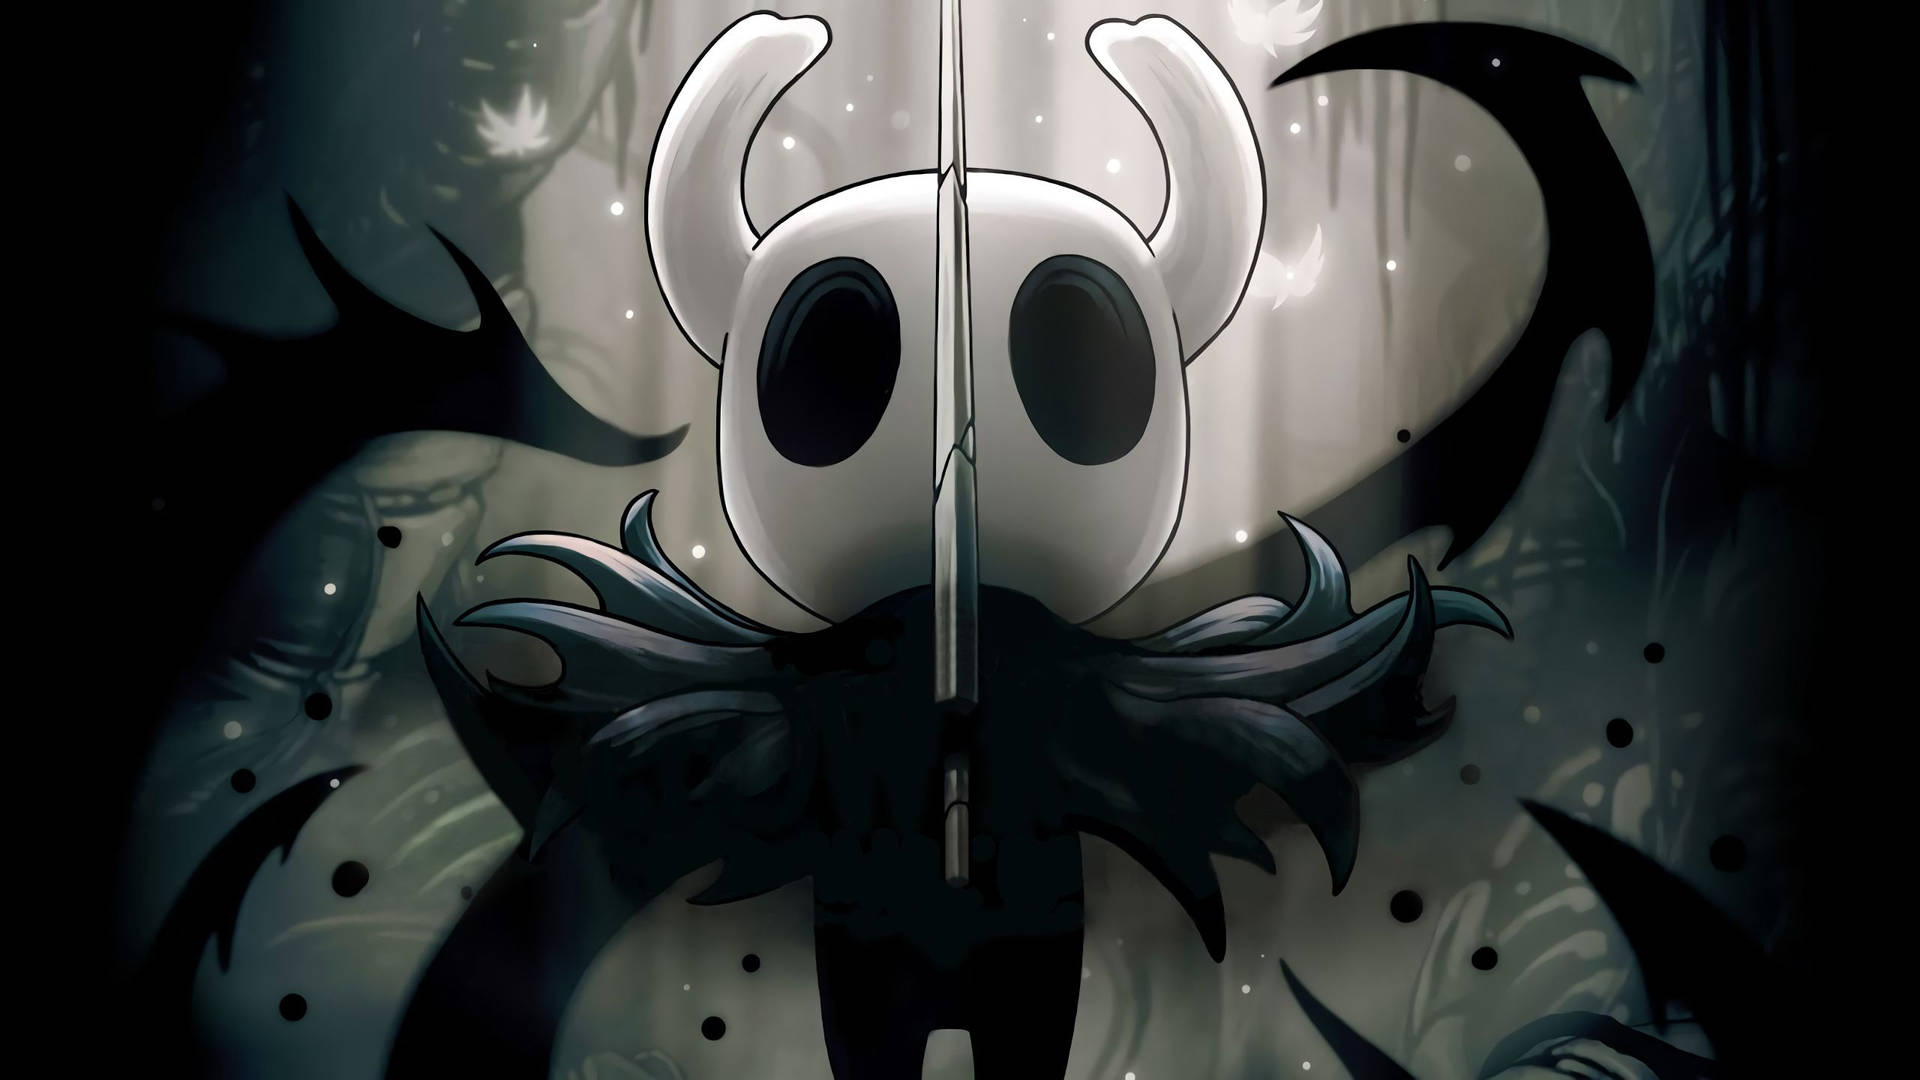 Hollow Knight 2560X1440 Wallpaper and Background Image